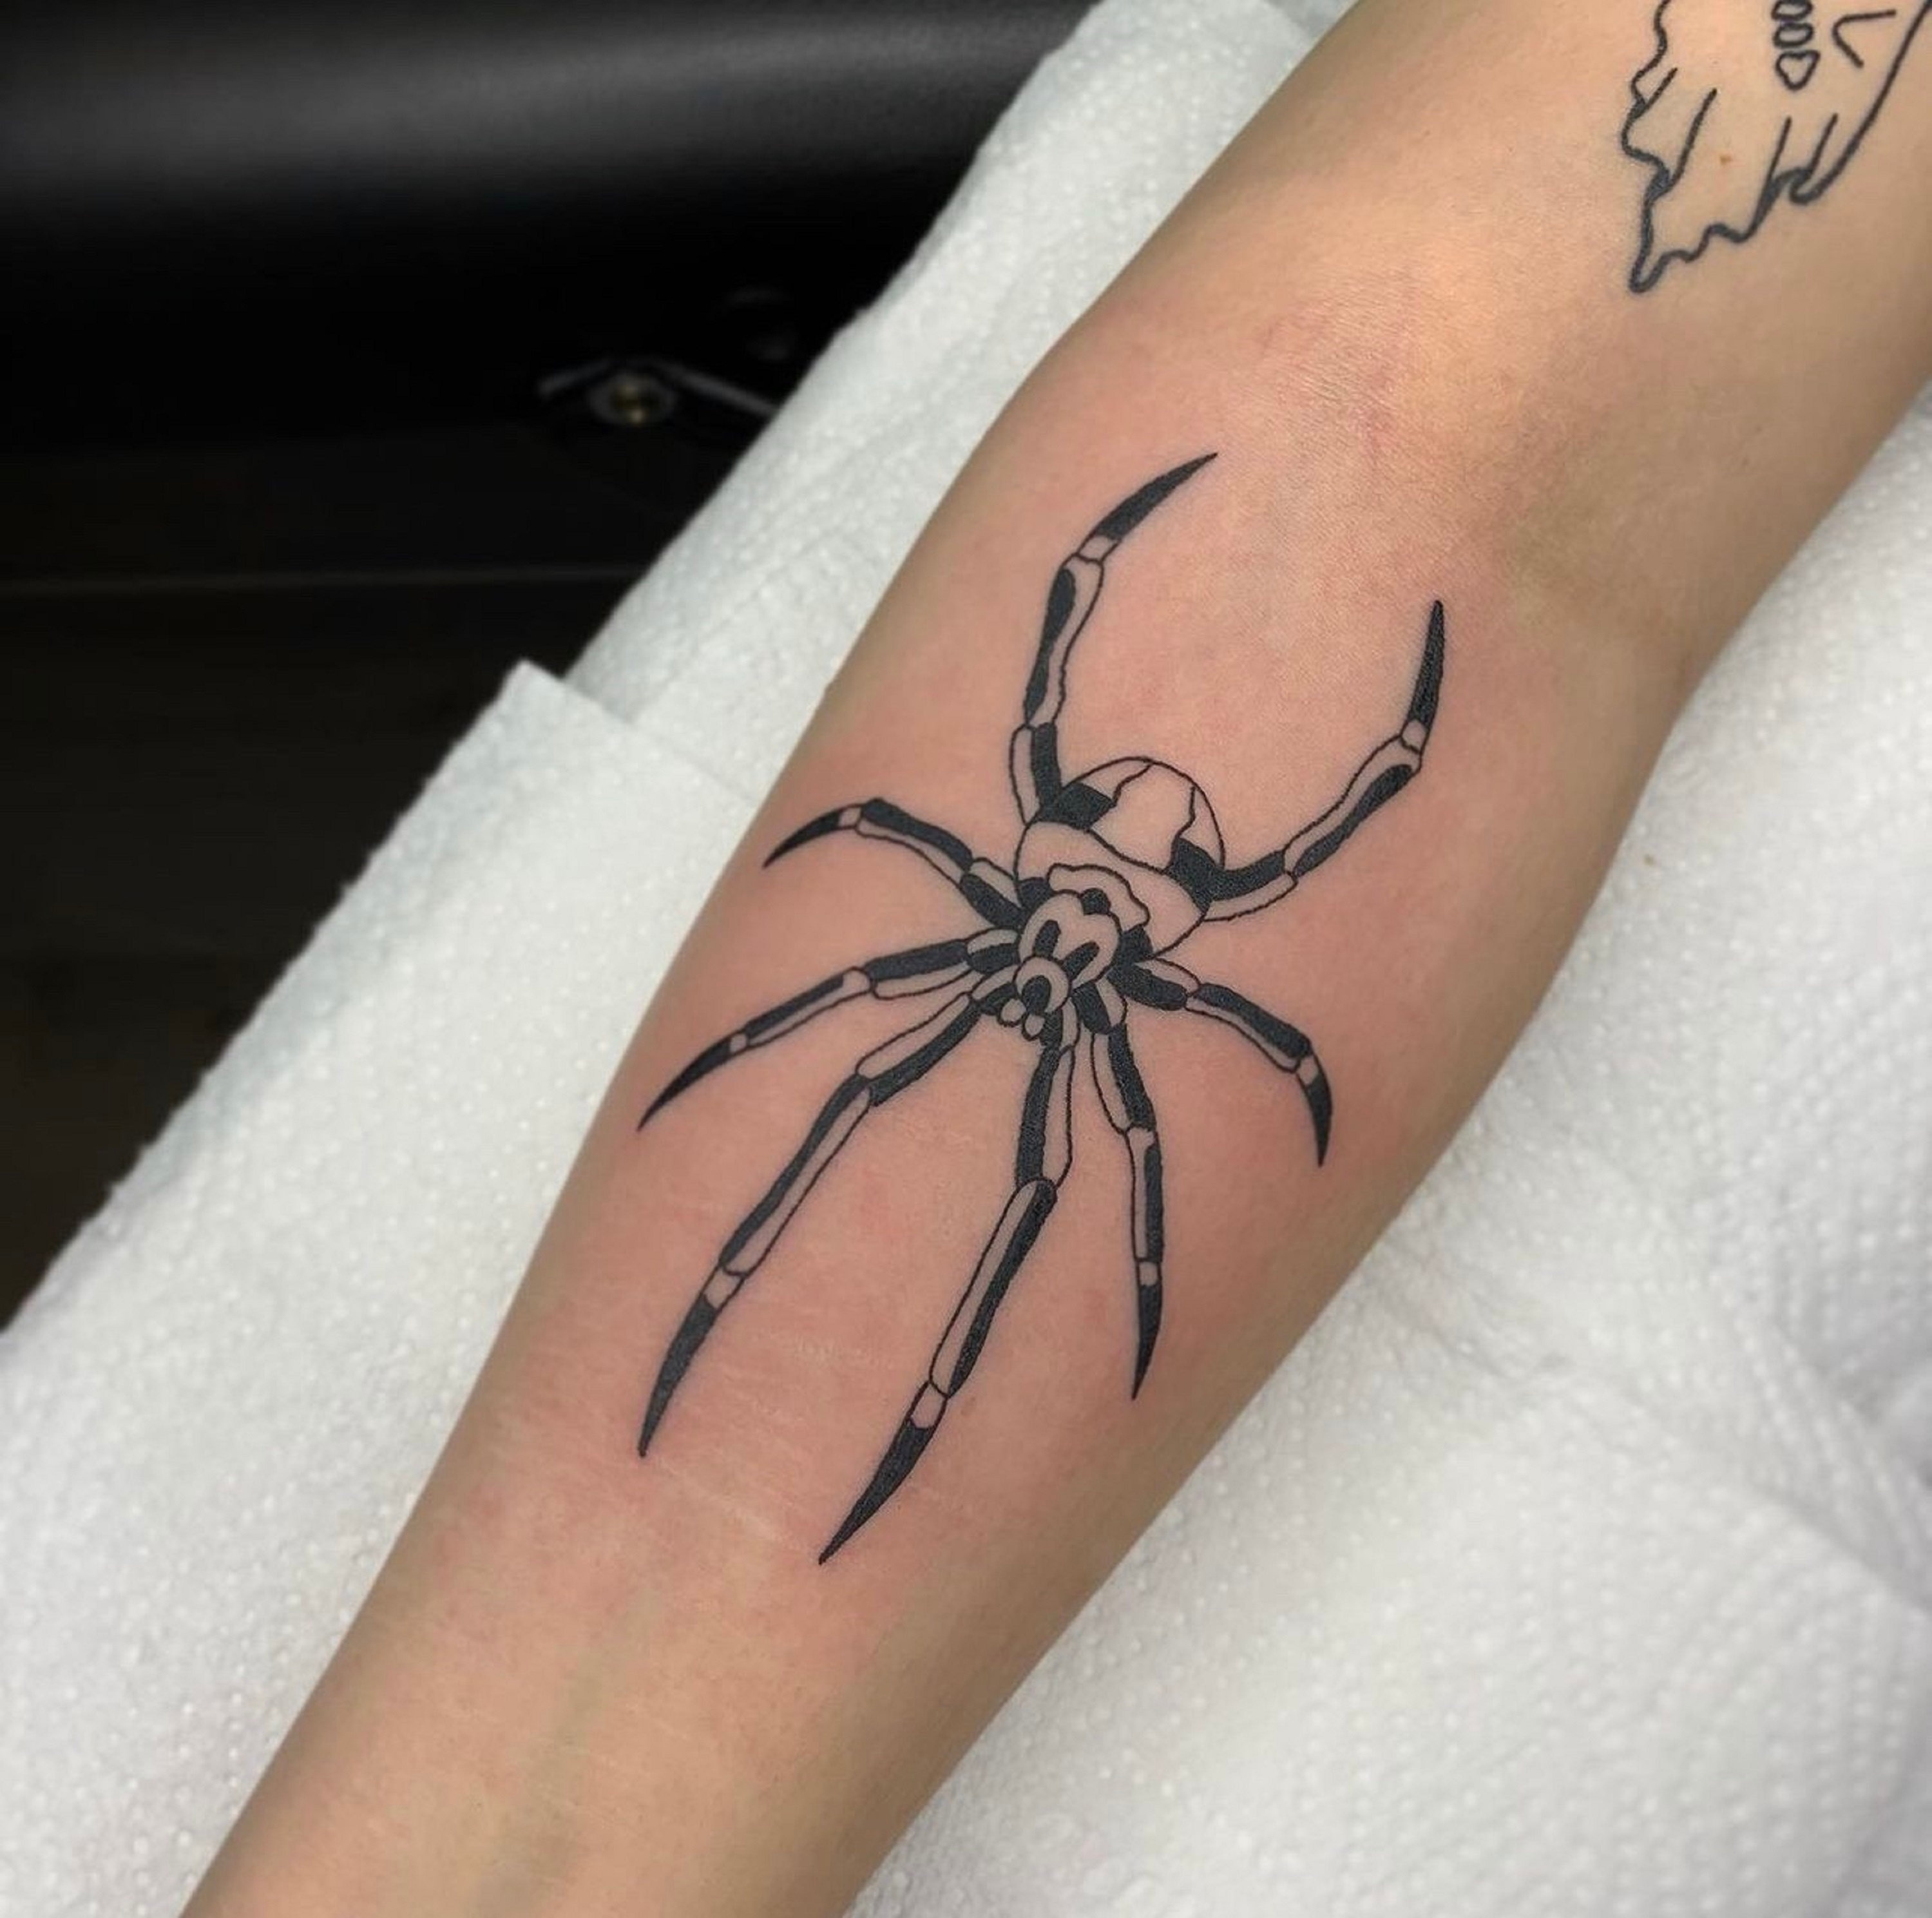 Man with Spider Tattoo on Head